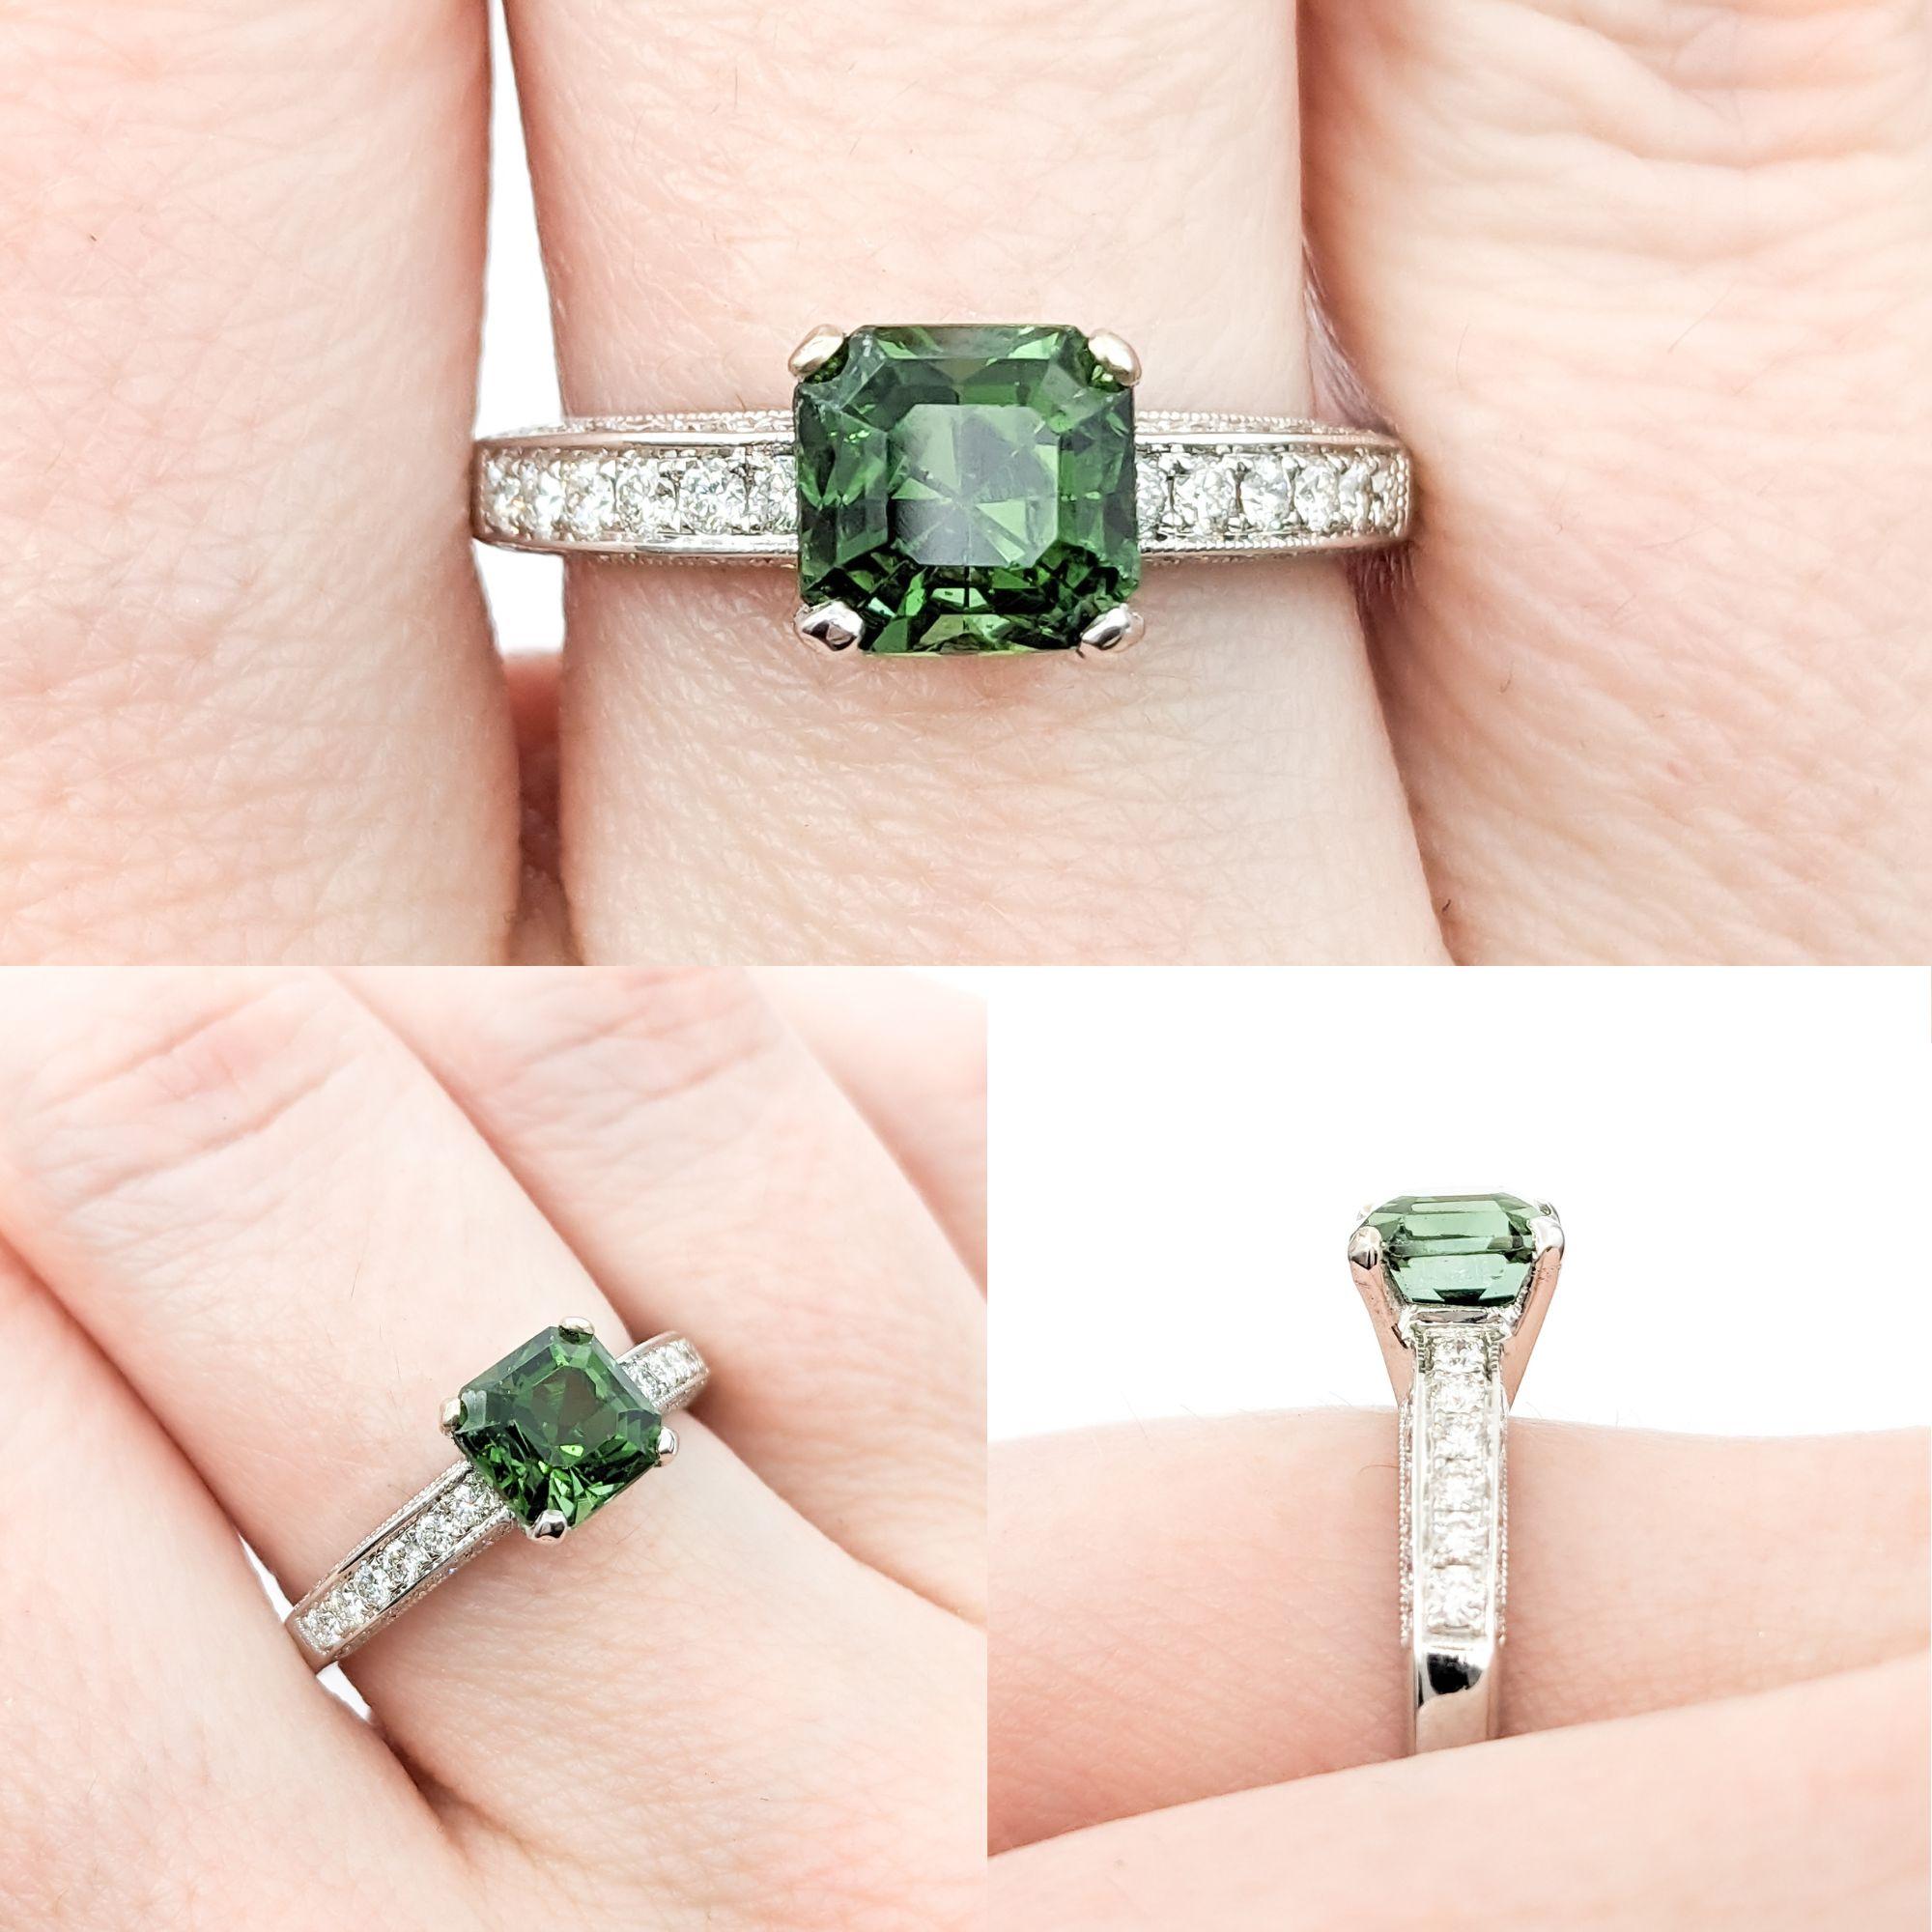 1.50ct Tourmaline & .60ctw Diamond Ring In White Gold

Introducing a stunning ring crafted in 14kt white gold. This exquisite piece features a 1.50ct green tourmaline centerpiece, complemented by .60ctw of round diamonds. The sparkling diamonds